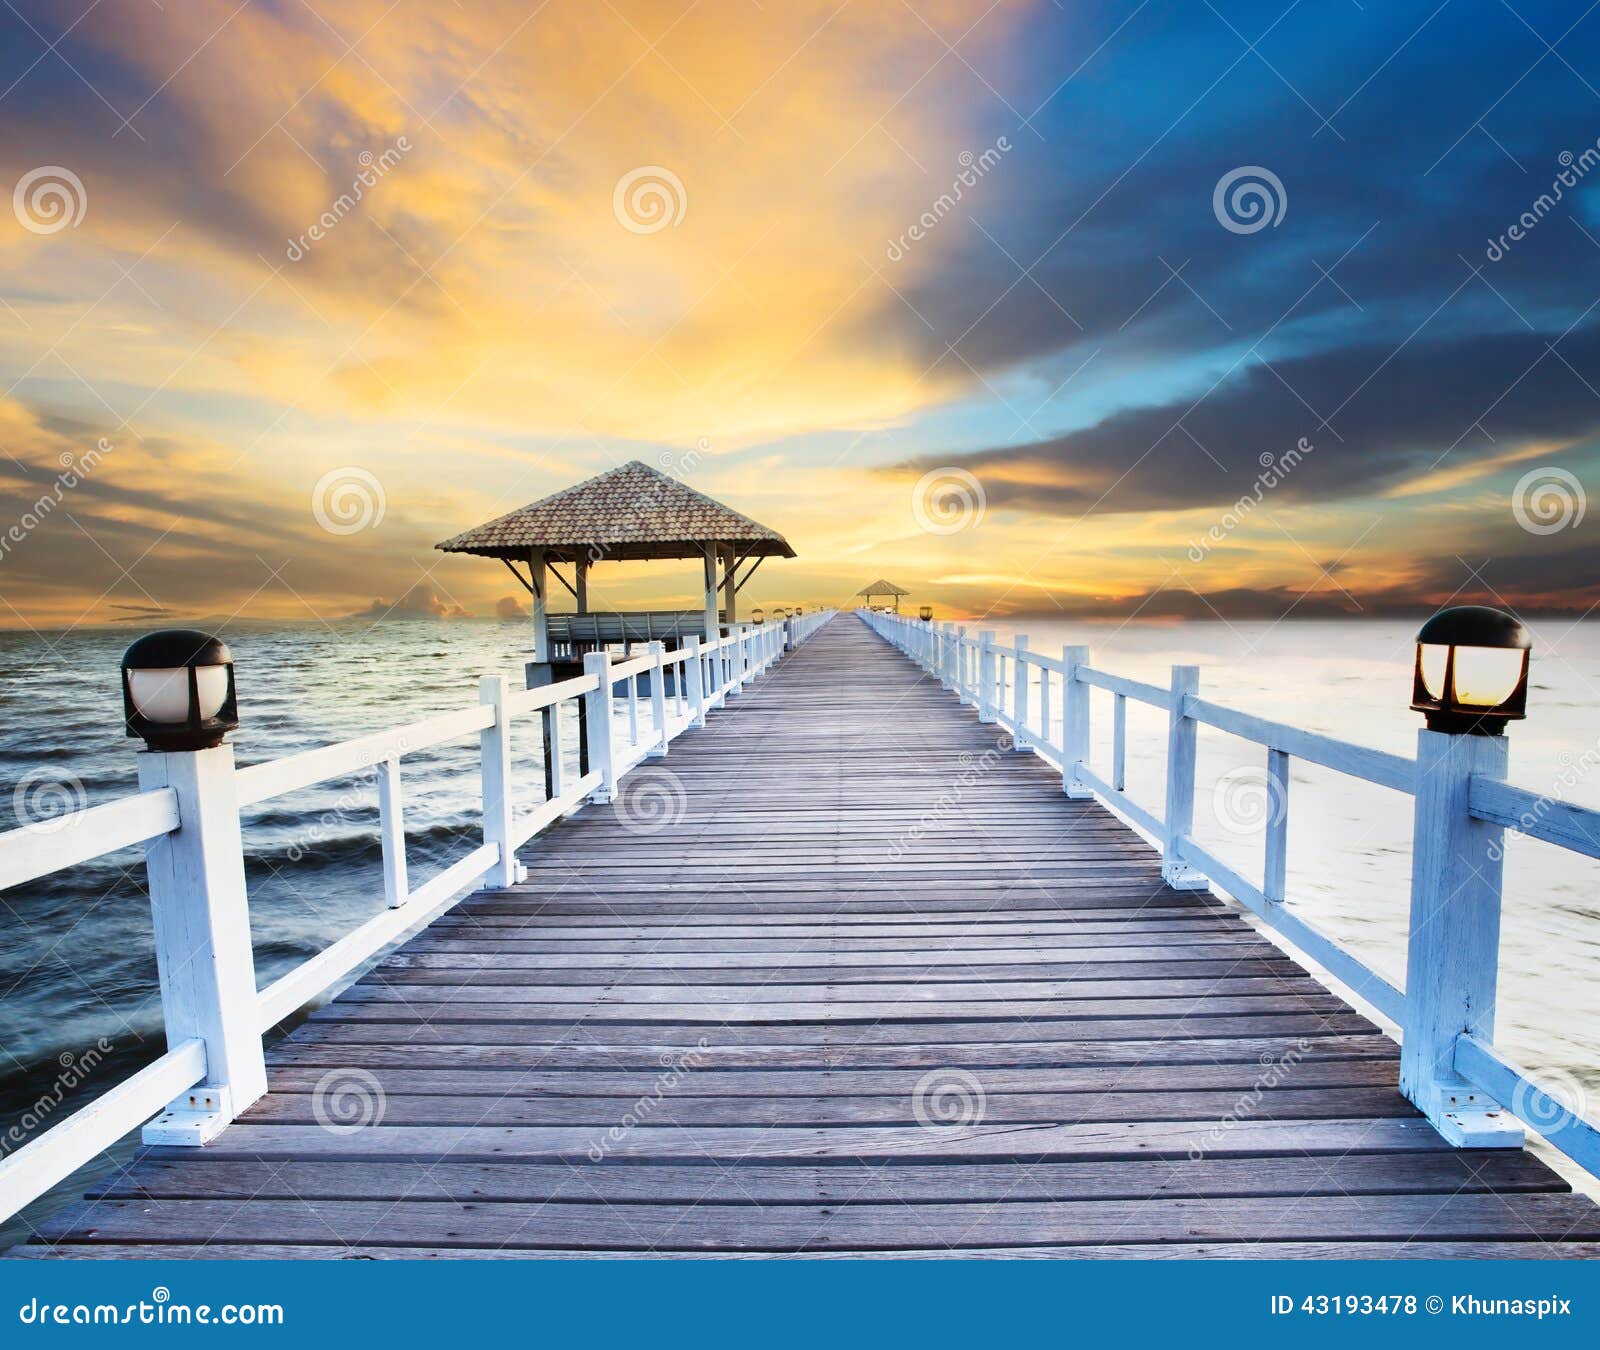 wood piers and sea scene with dusky sky use for natural background ,backdrop